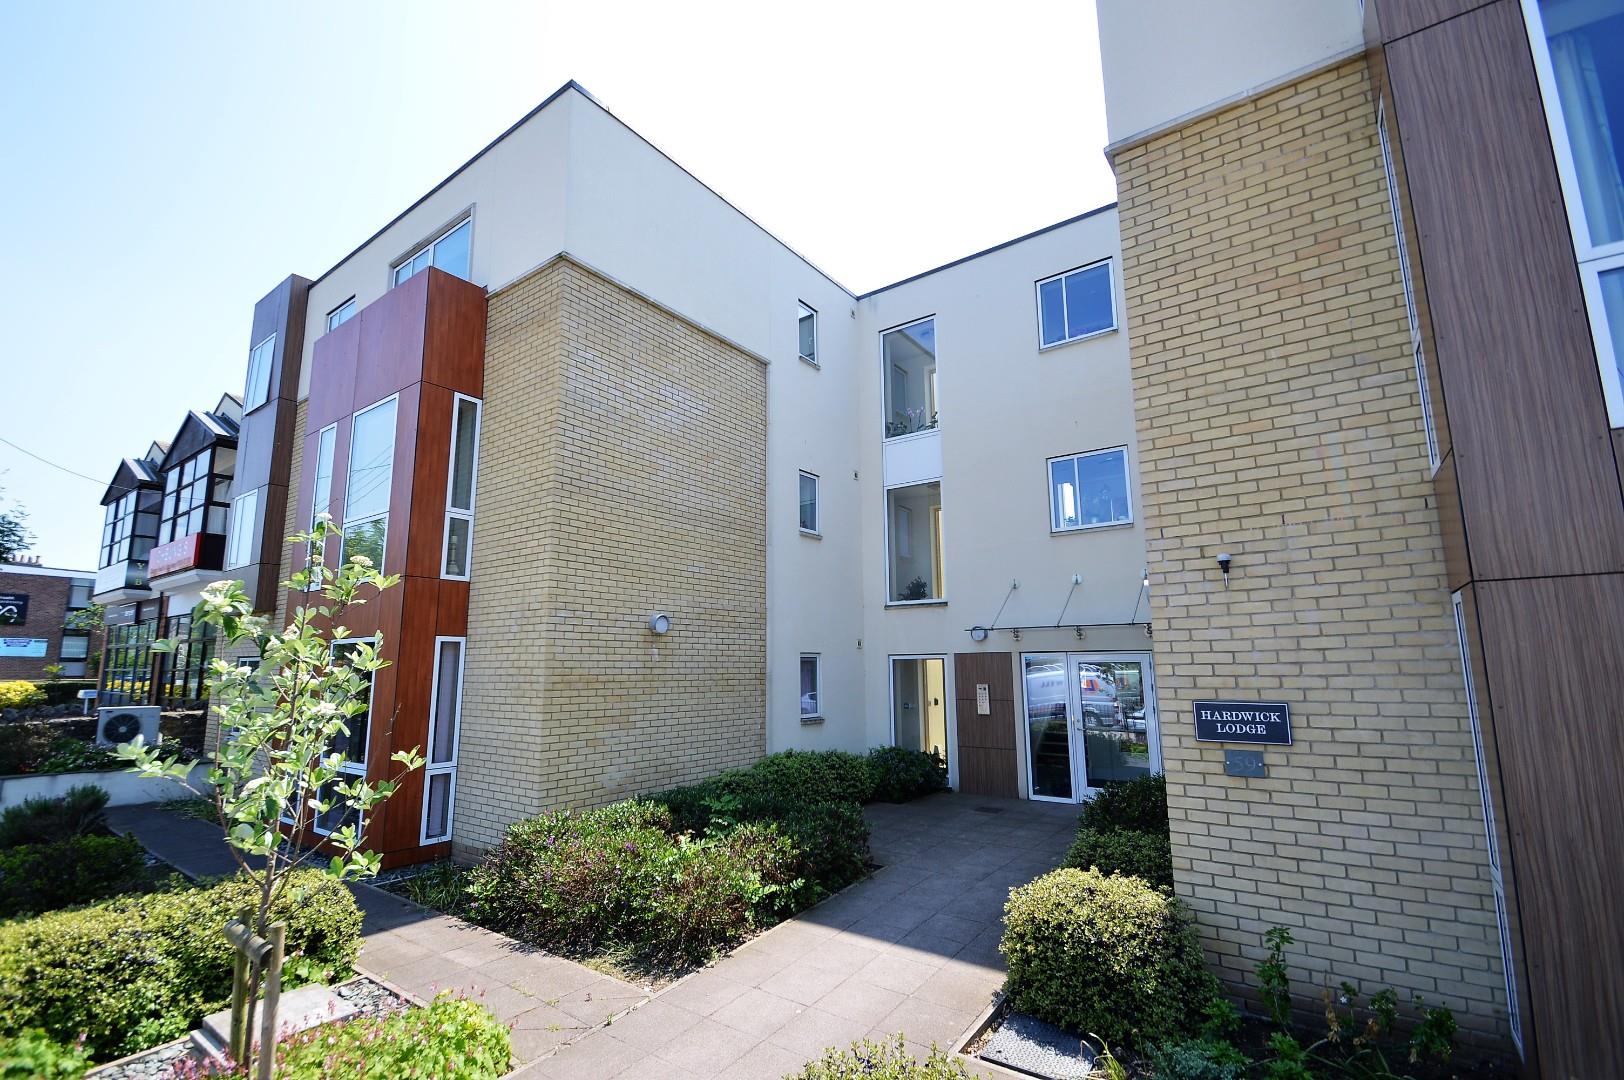 Retirement apartment just a stone's throw from the shops in Yatton